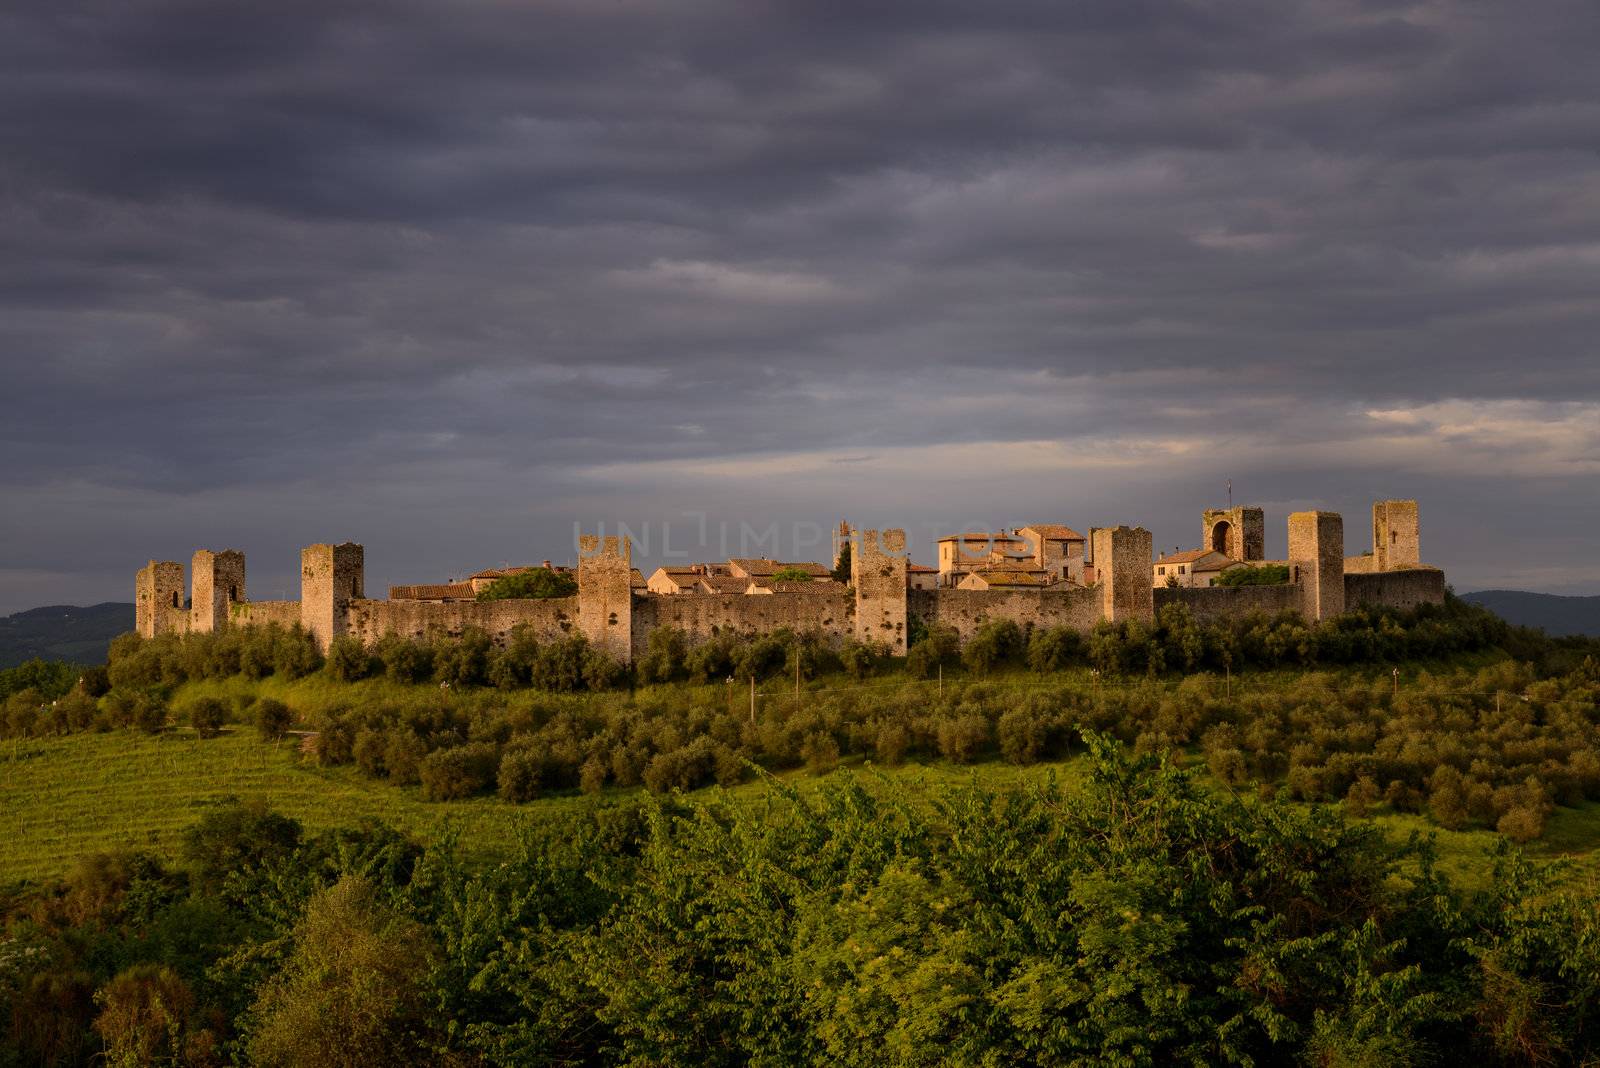 Photos of Monteriggioni, a medieval walled town located on a natural hillock, in the Siena Province of Tuscany